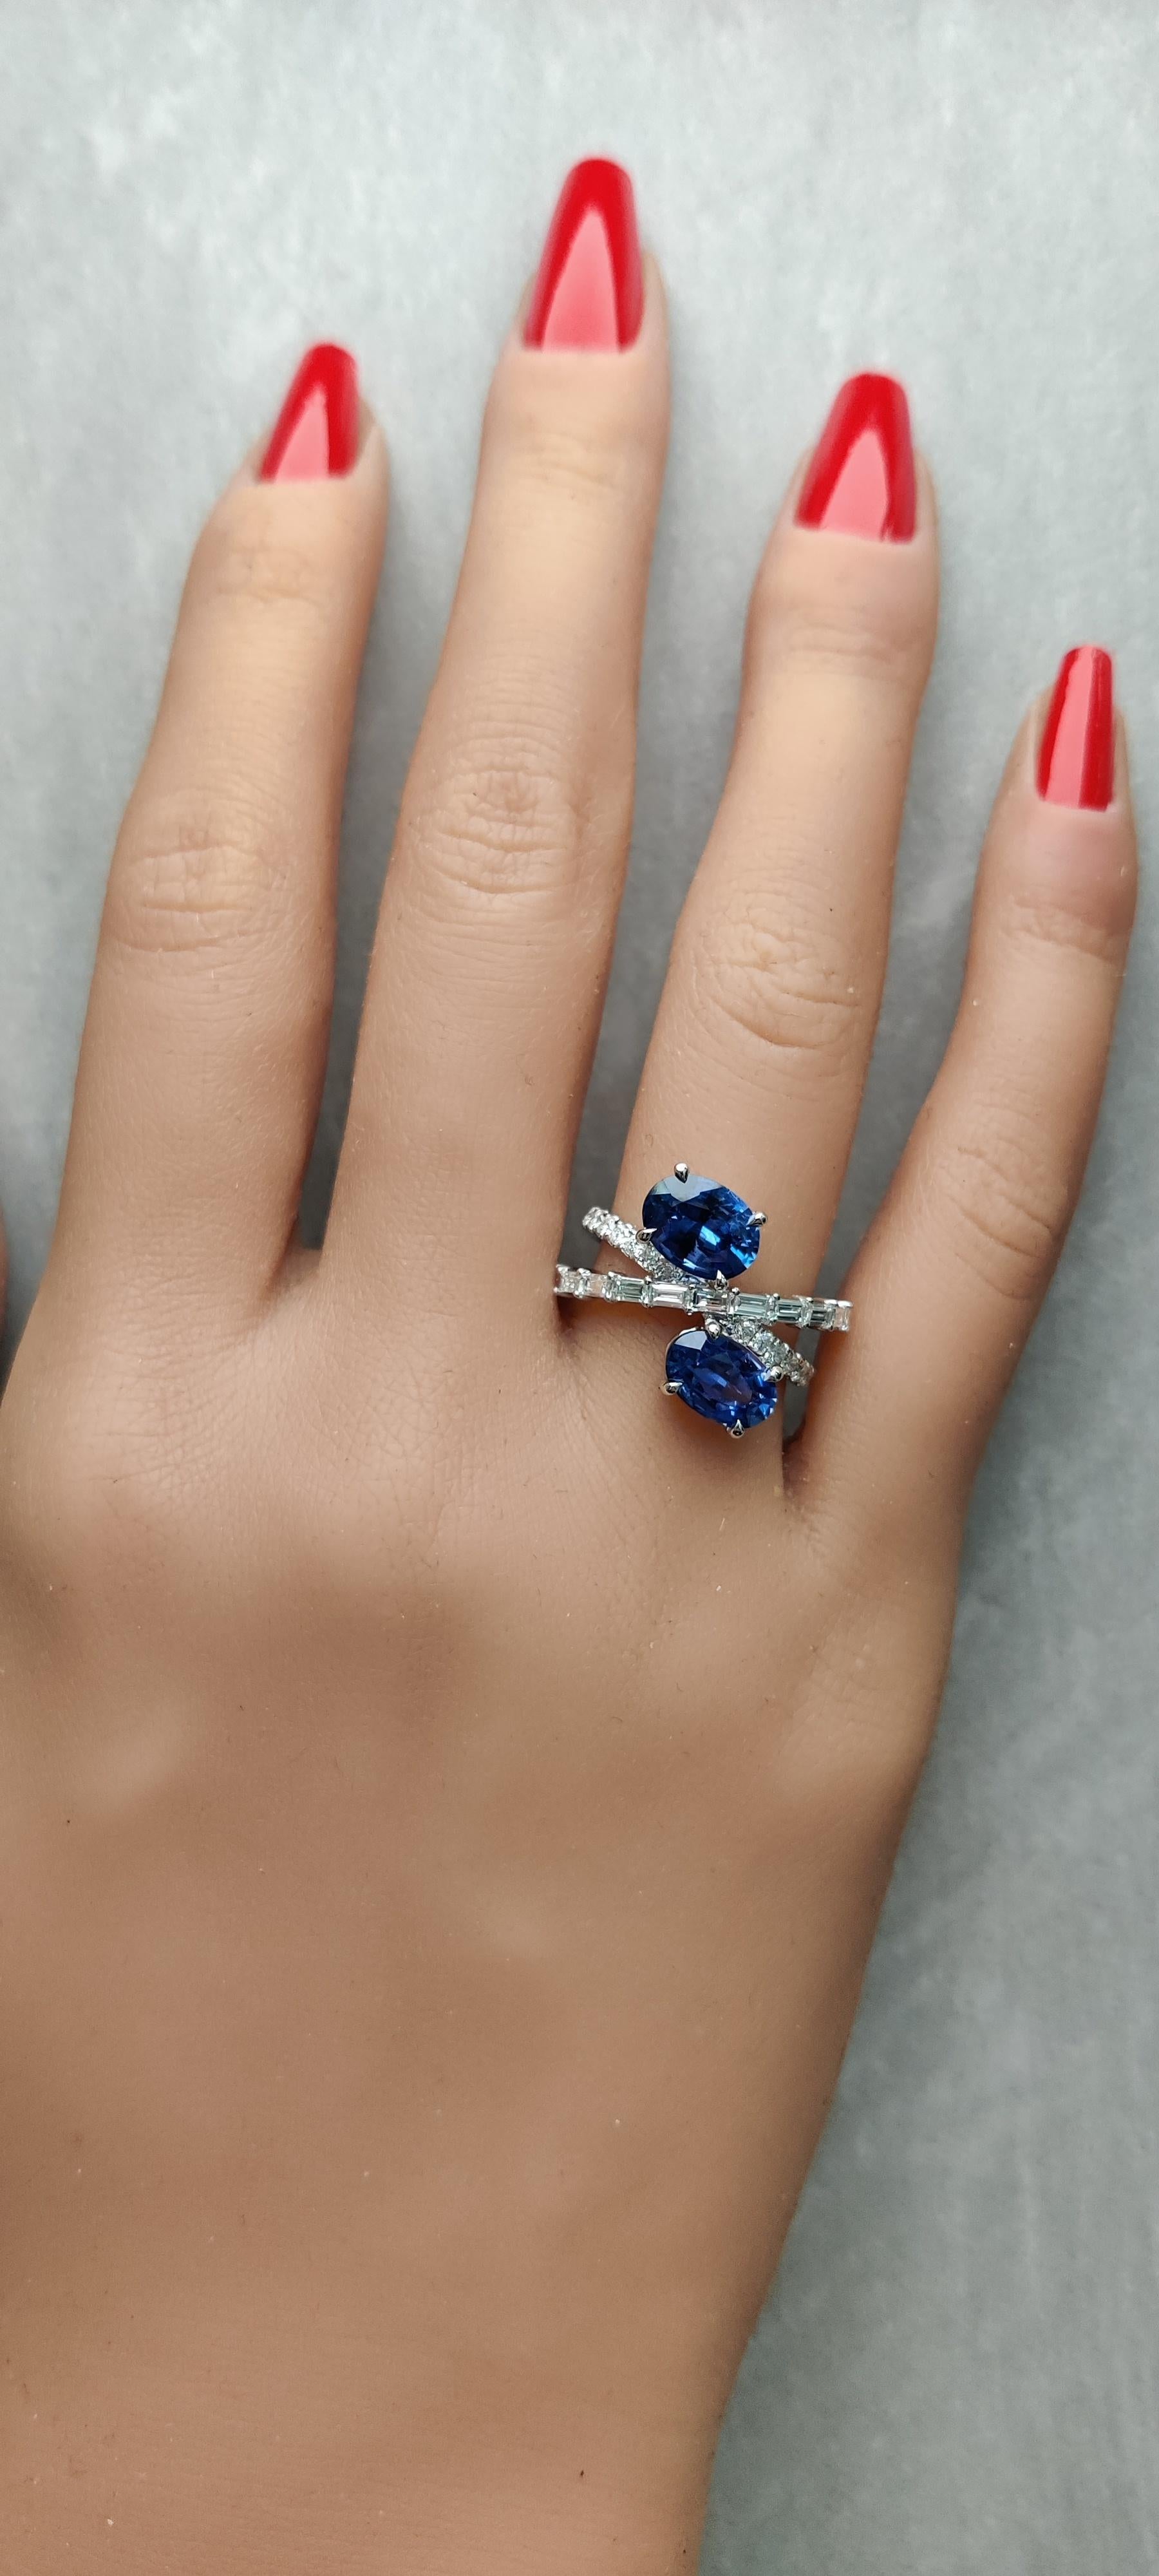 RareGemWorld's classic sapphire ring. Mounted in a beautiful 18K White Gold setting with two natural oval cut blue sapphire. The sapphire is surrounded by natural baguette cut white diamond and round natural white diamond melee. This ring is